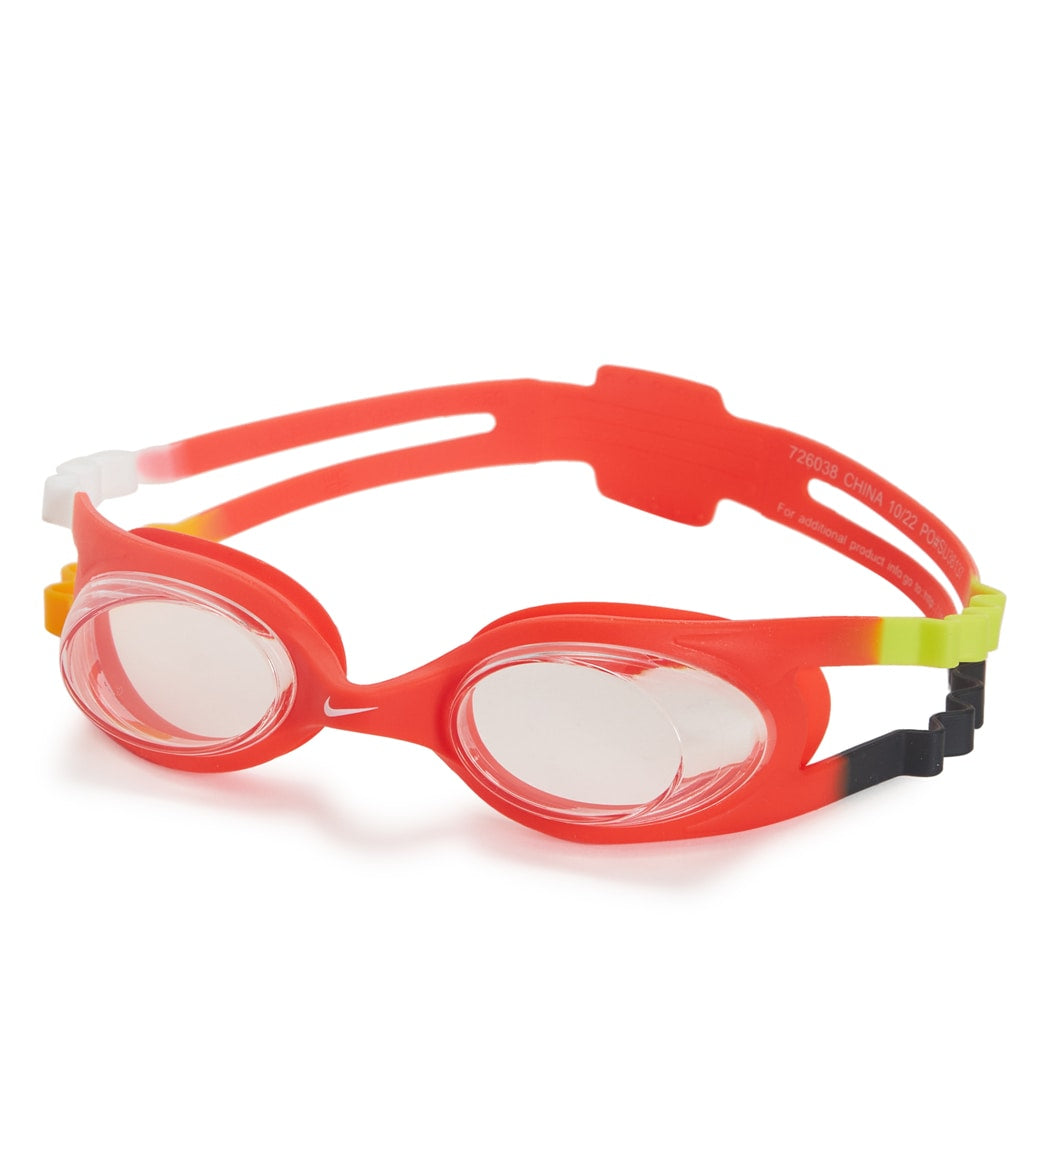 Nike Kids' Easy-Fit Goggles at SwimOutlet.com